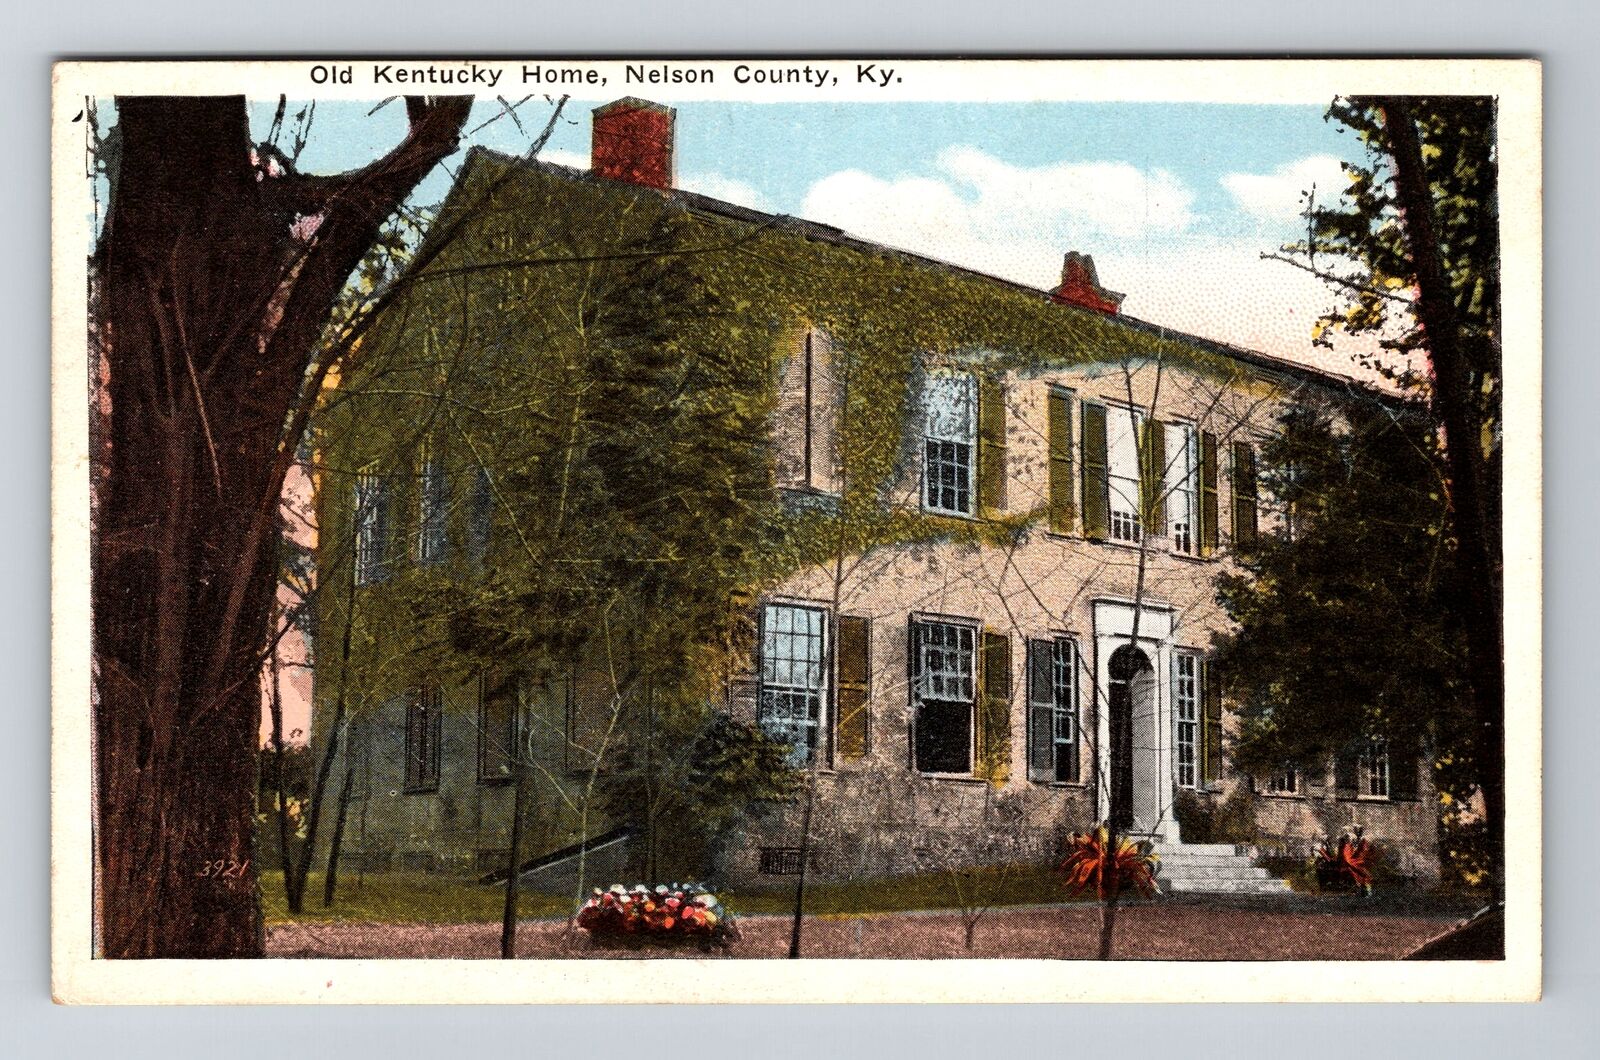 Nelson County KY-Kentucky, Old Kentucky Home, Vintage Postcard